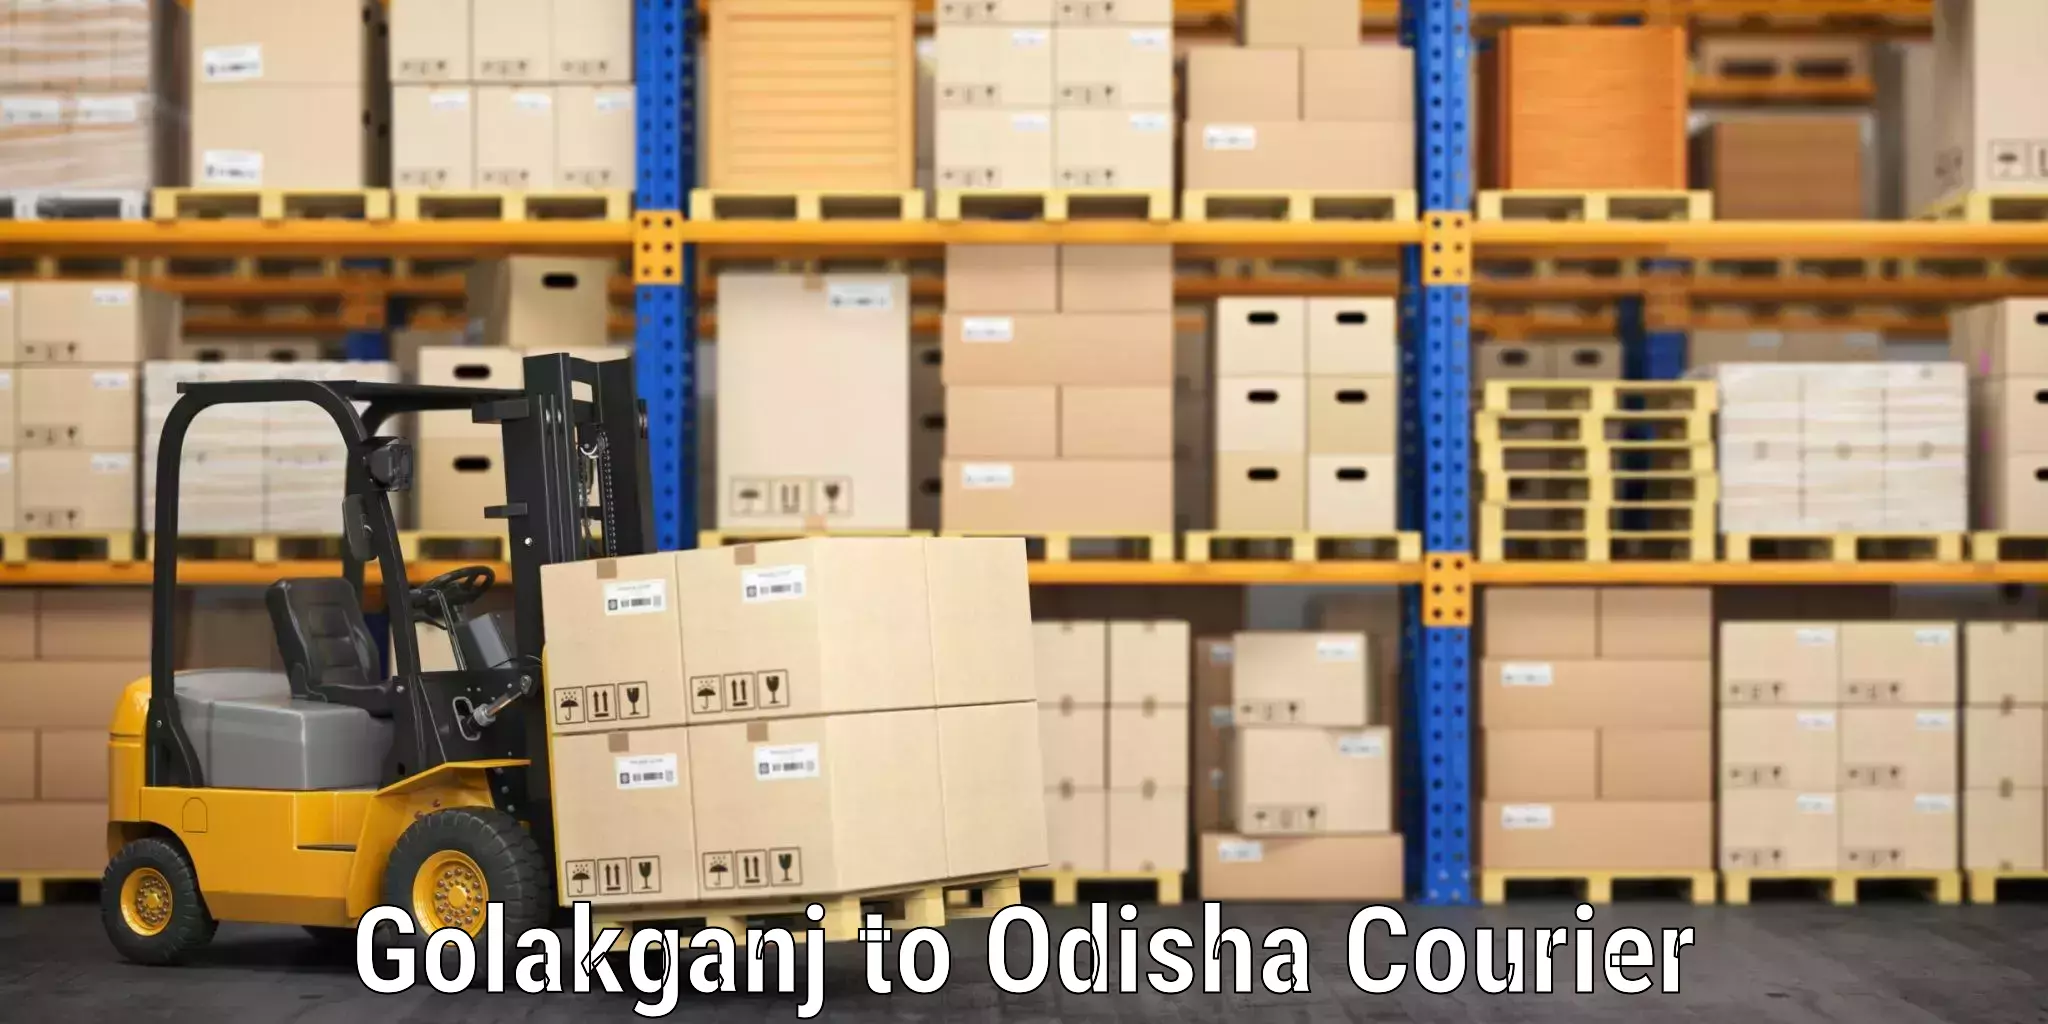 Instant baggage transport quote Golakganj to Chandipur